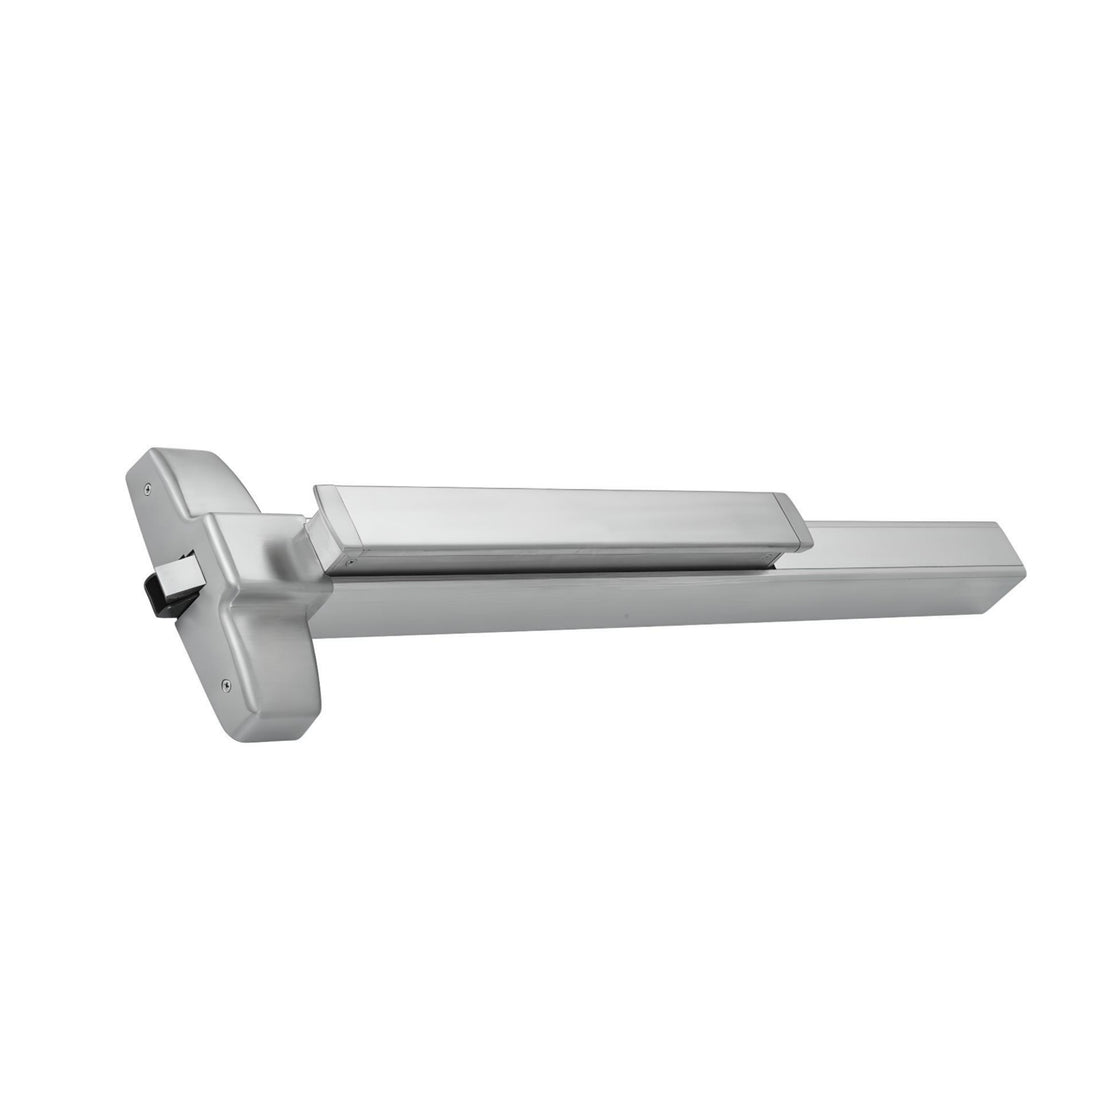 900 Series UL Listed Aluminum 36 in Grade 1 Heavy Duty Panic Rim Surface Exit Device